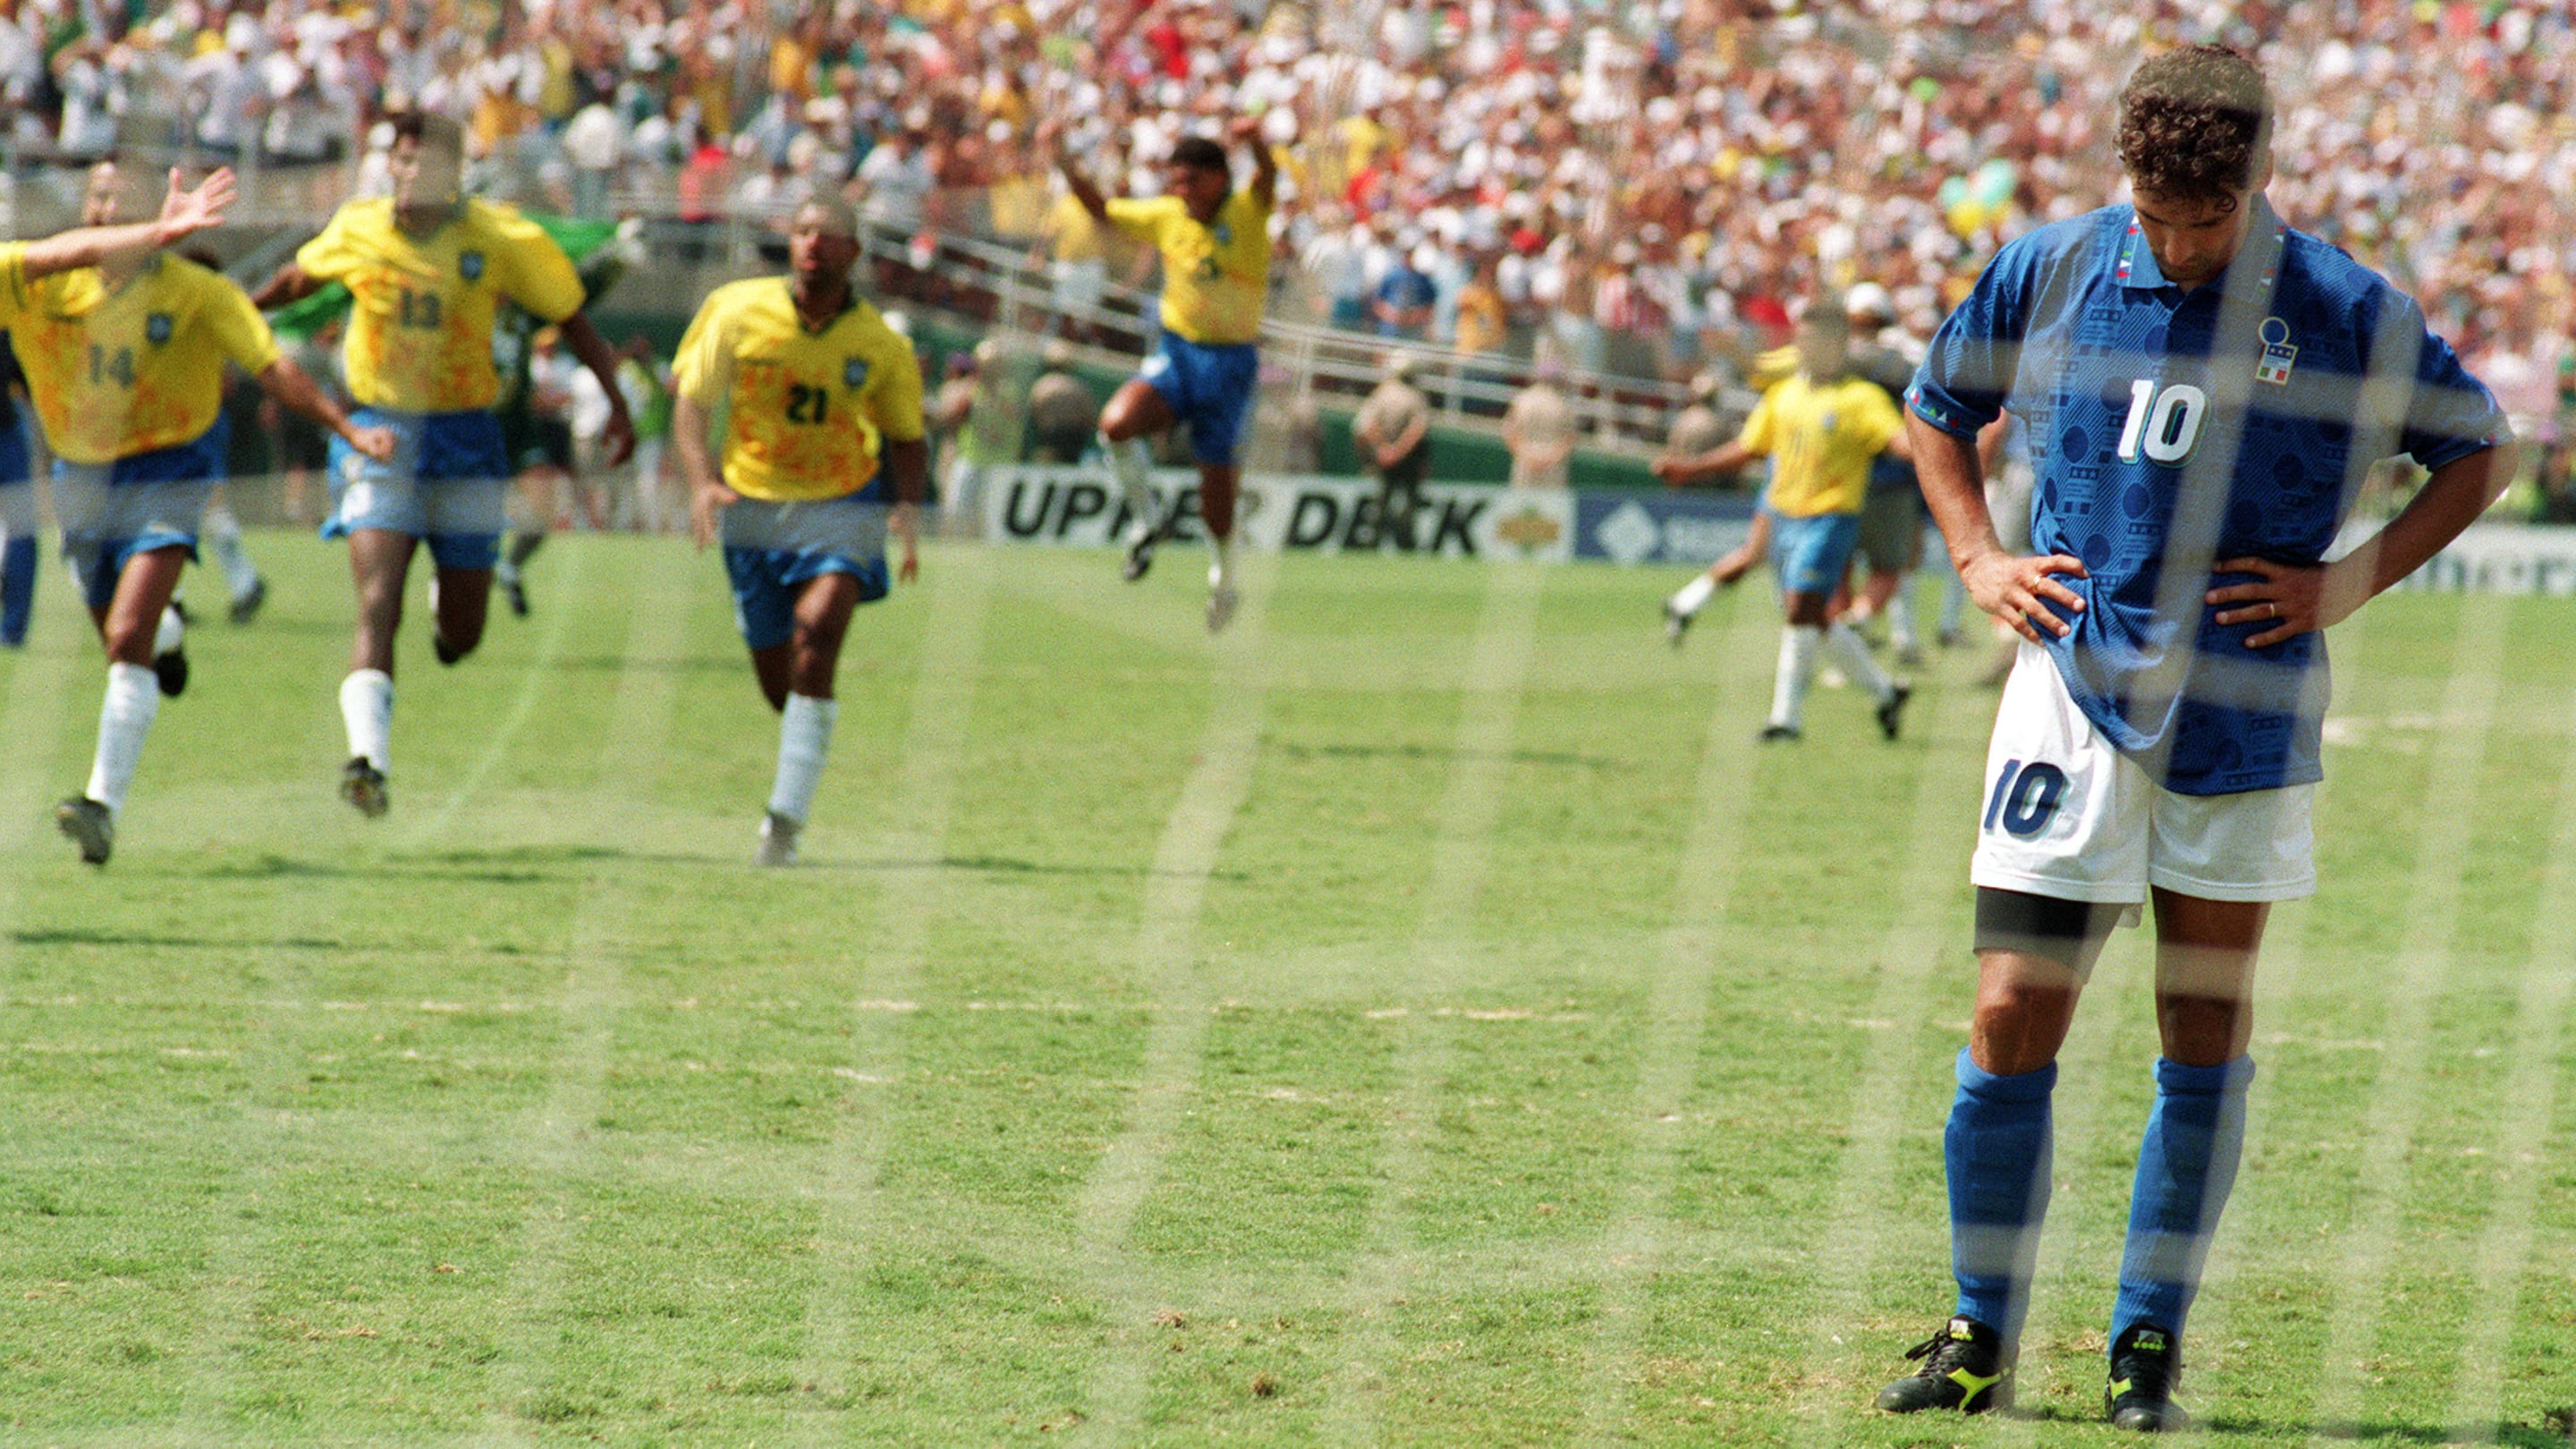 Roberto Baggio: Italy's greatest ever player and the penalty miss which defined him